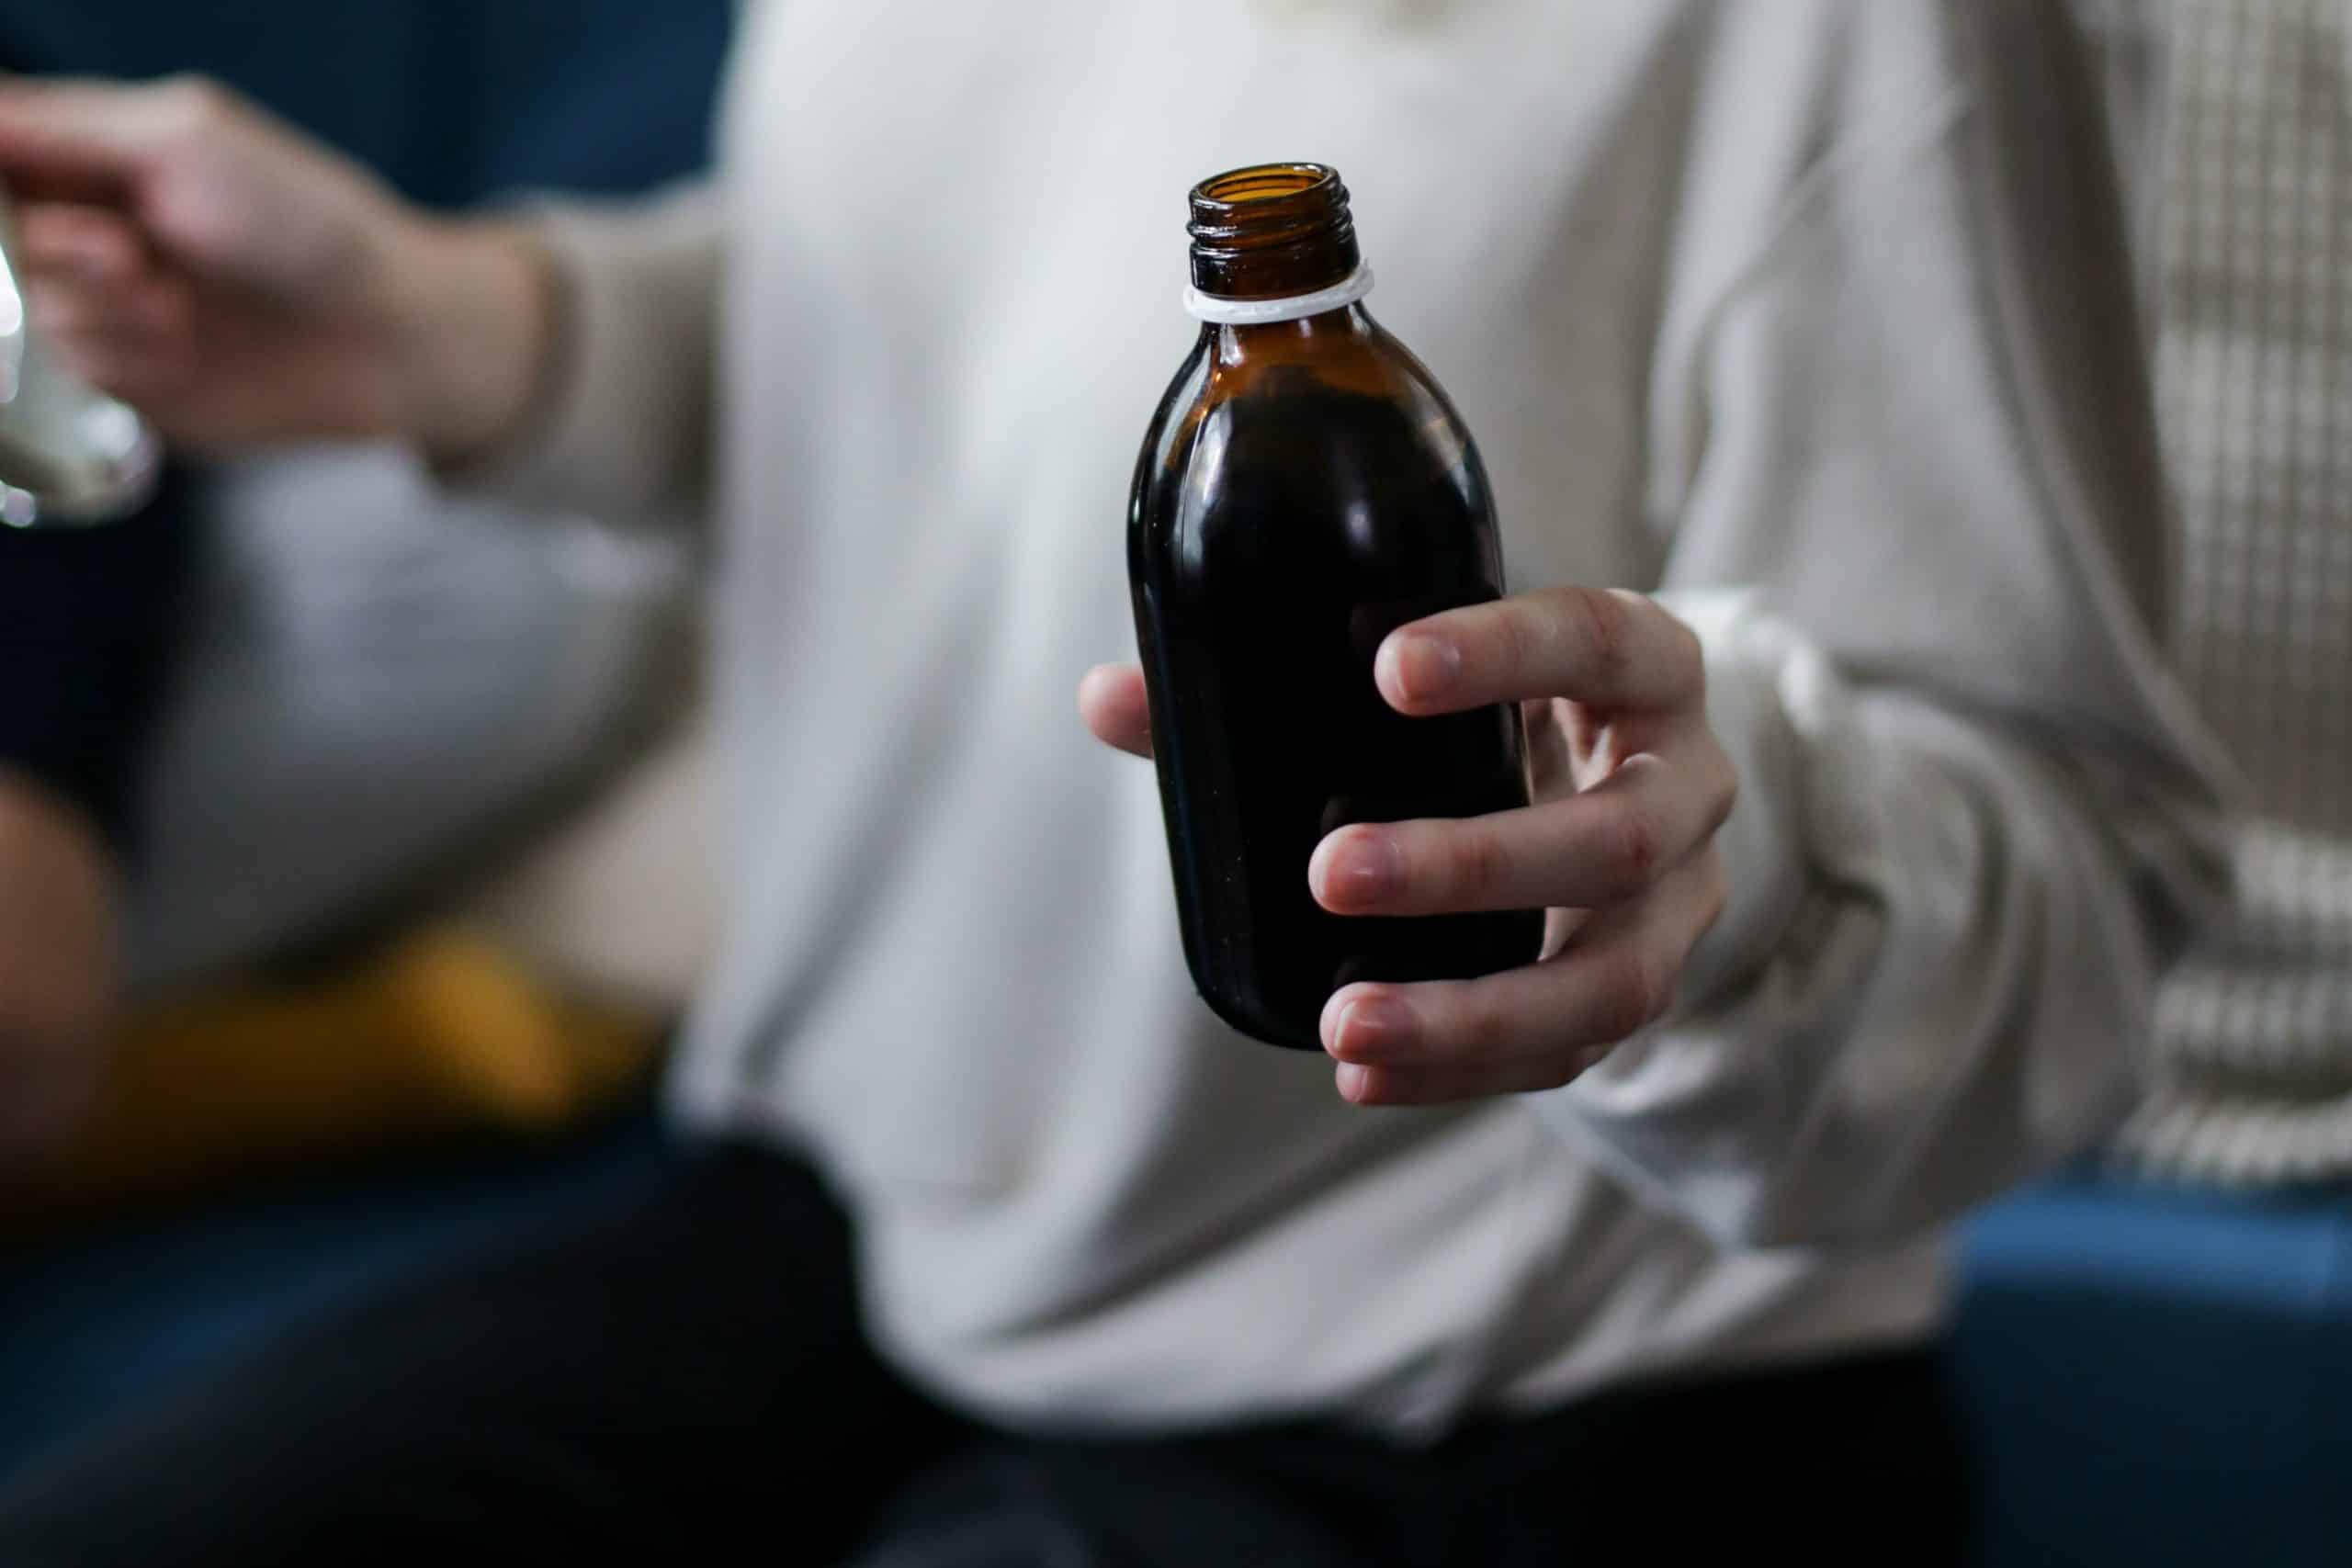 Person holding aa bottle of cough syrup and a spoon